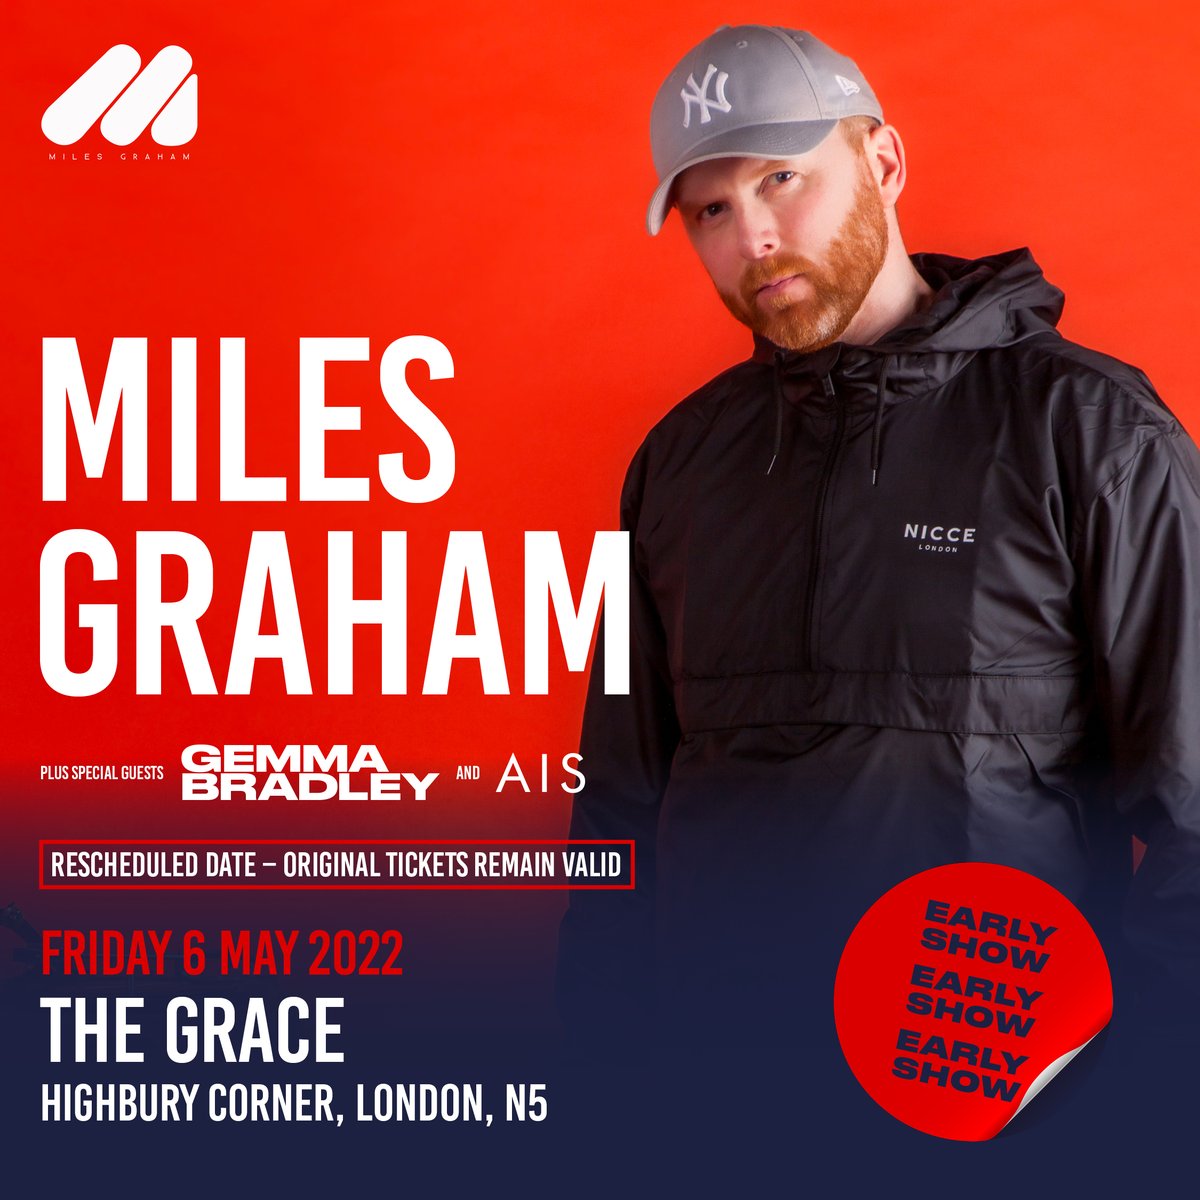 .@IAM_MILESGRAHAM has announced that @Gemma_Bradley_ & @MusicAIS2020 will be his special guests for his headline show at @thegraceldn on Friday 6th May 2022! Don't miss the Dublin born Singer/Songwriter live! ⏰ Tickets are on sale now 🎫 w.axs.com/x4P250IPyv4